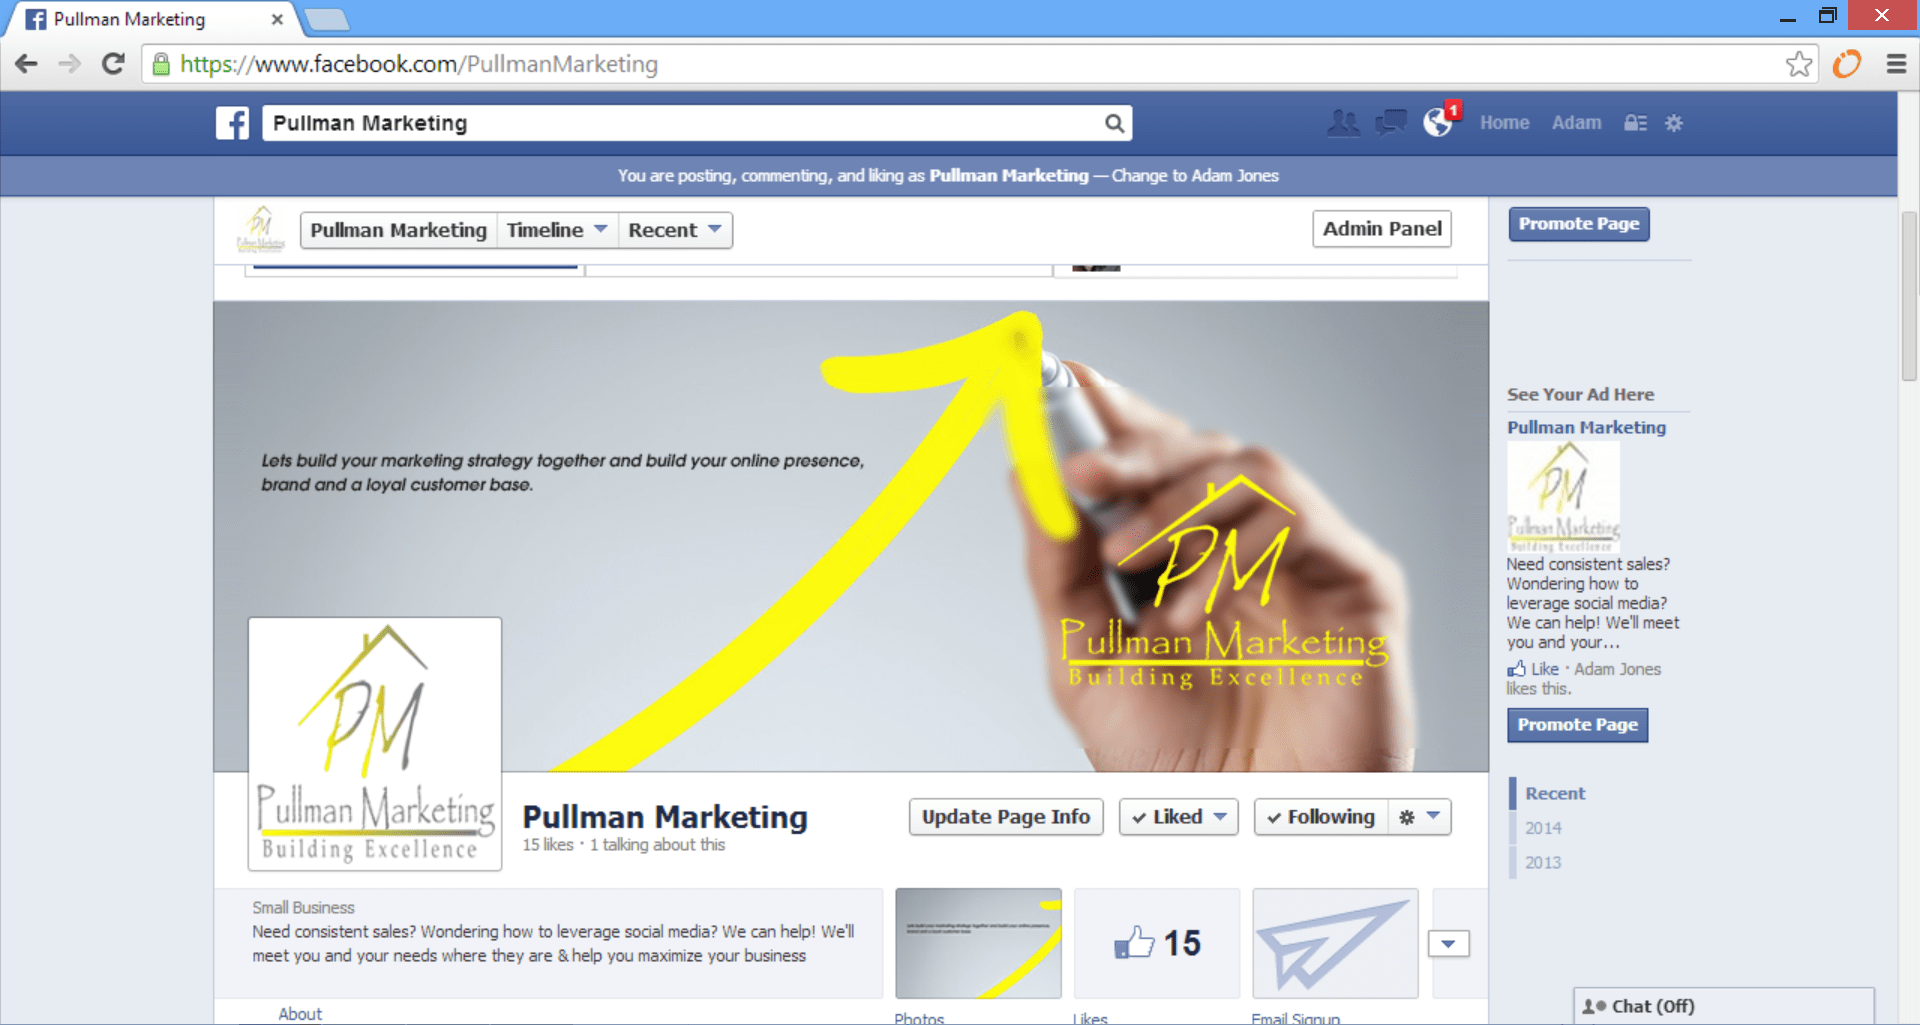 social media strategy - Pullman Marketing - Generic Facebook Page